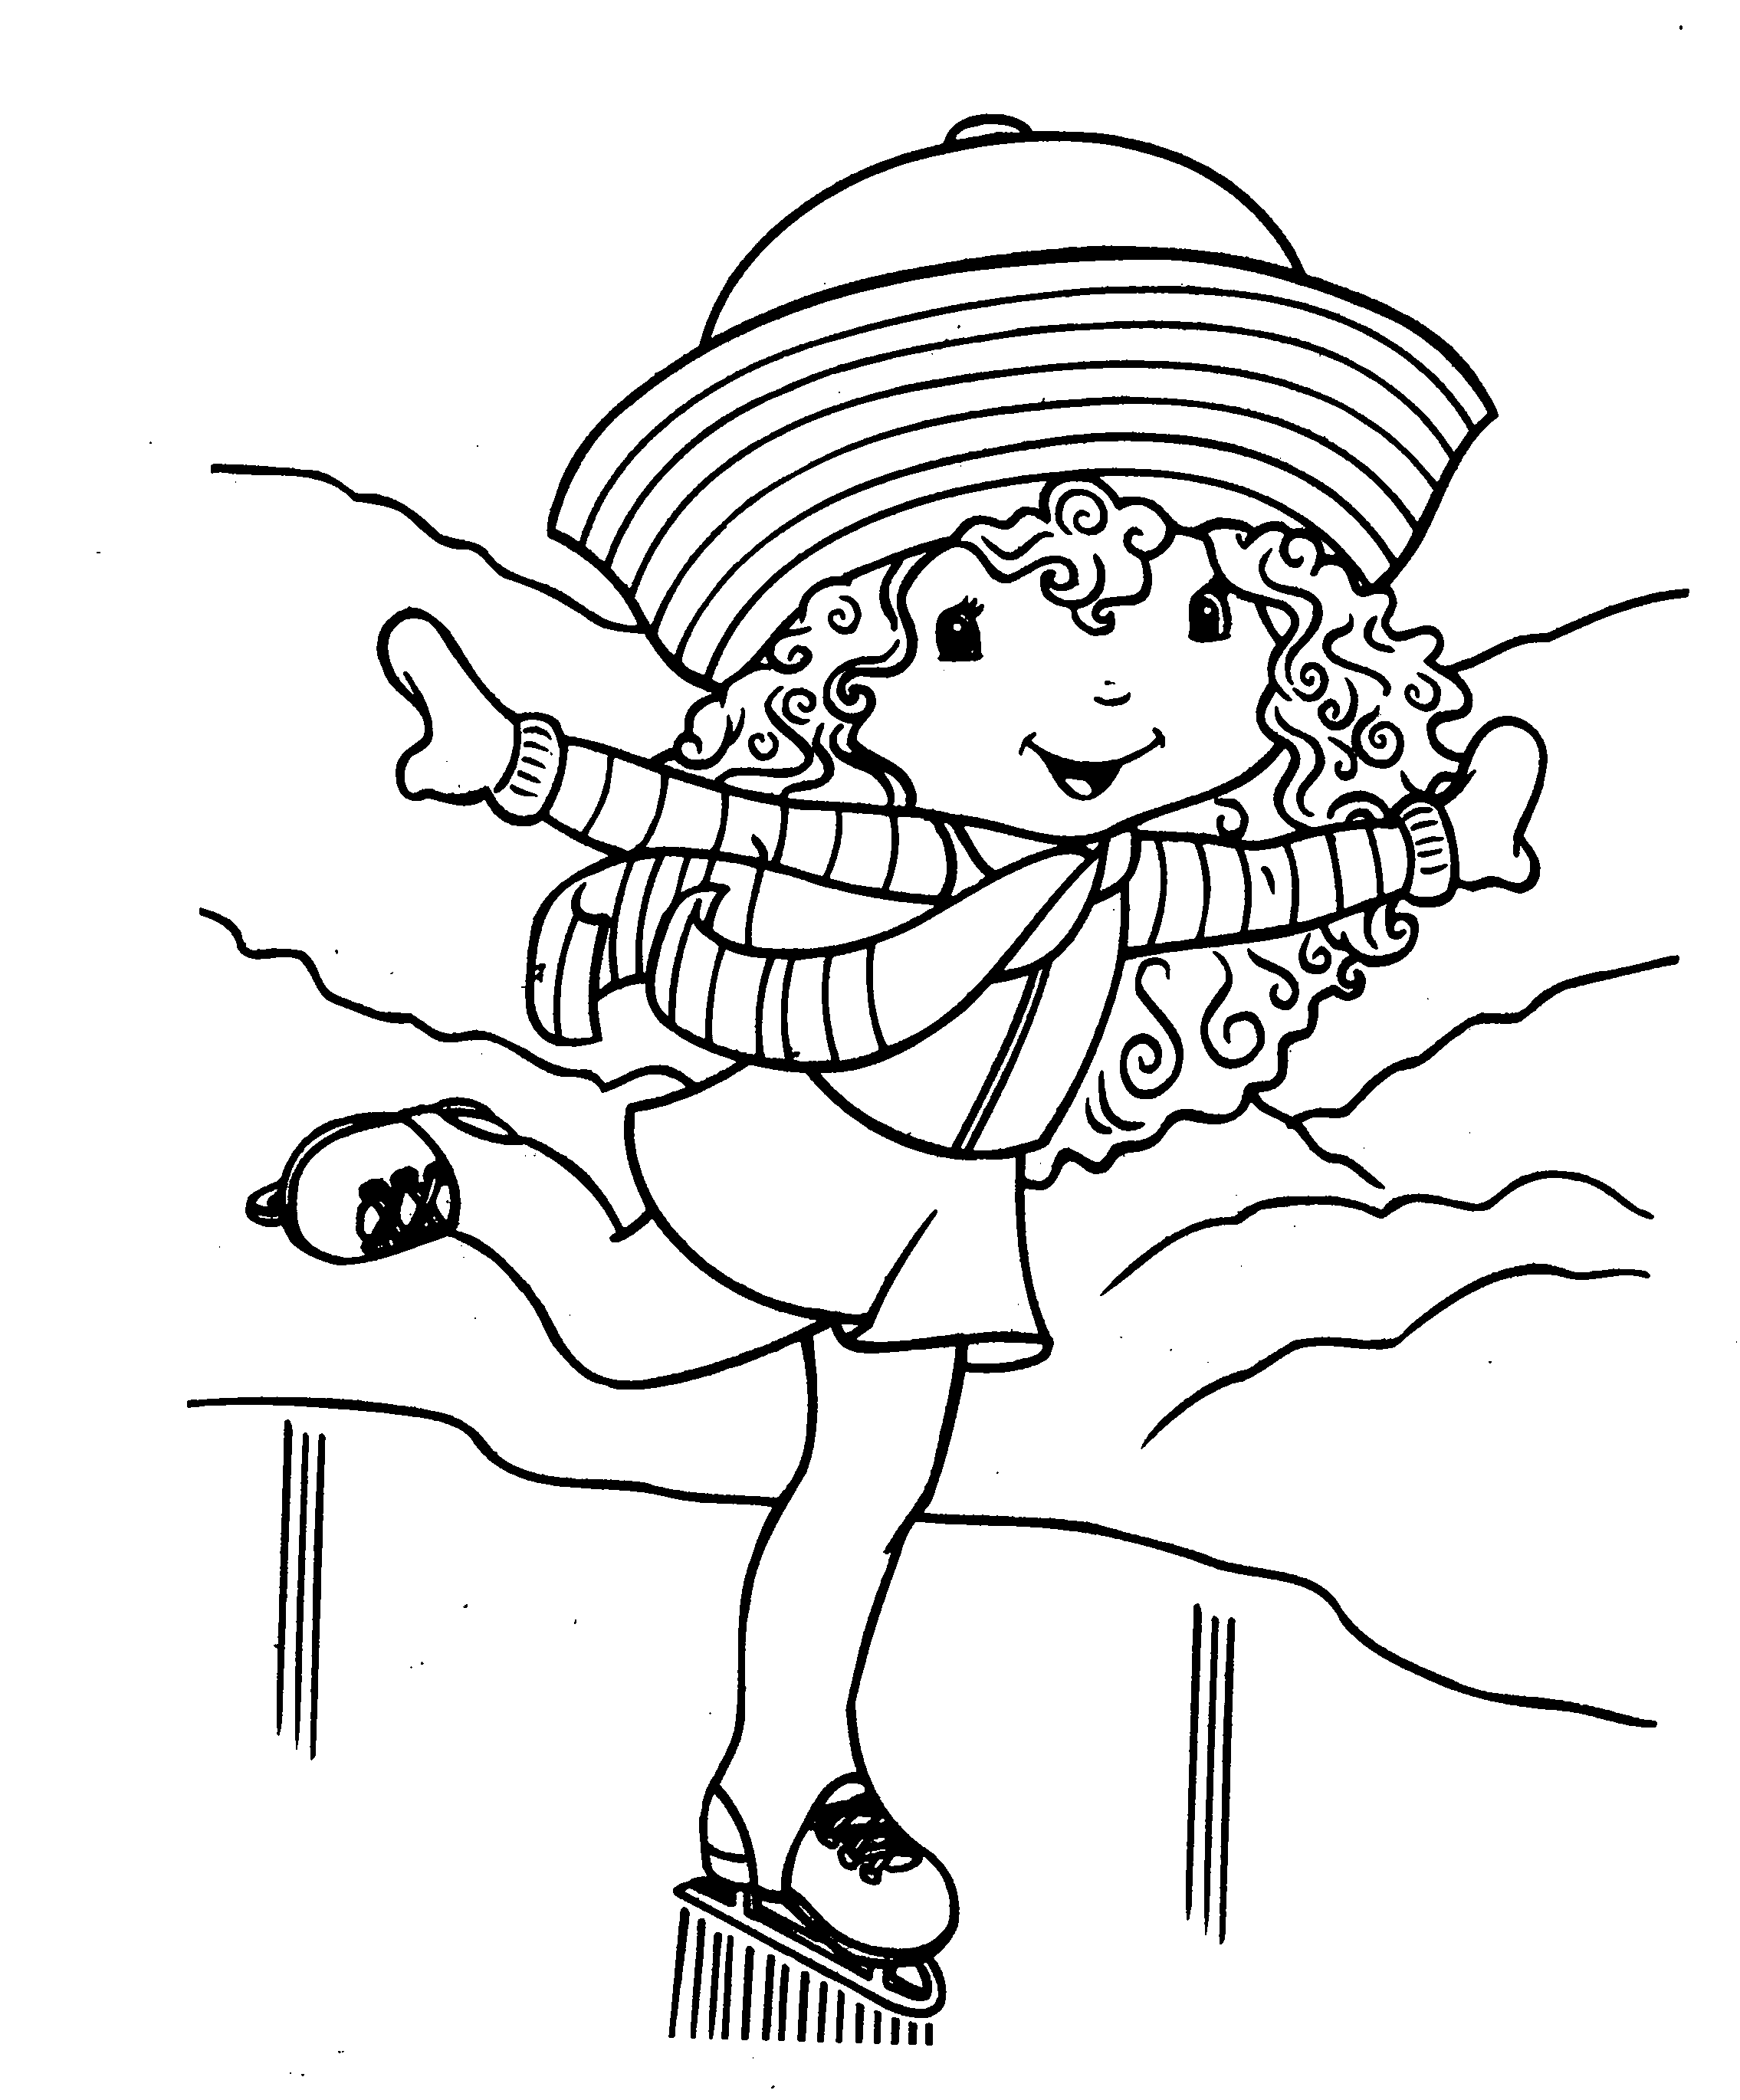 Strawberry Shortcake Coloring Pages / Cool coloring pages / 6